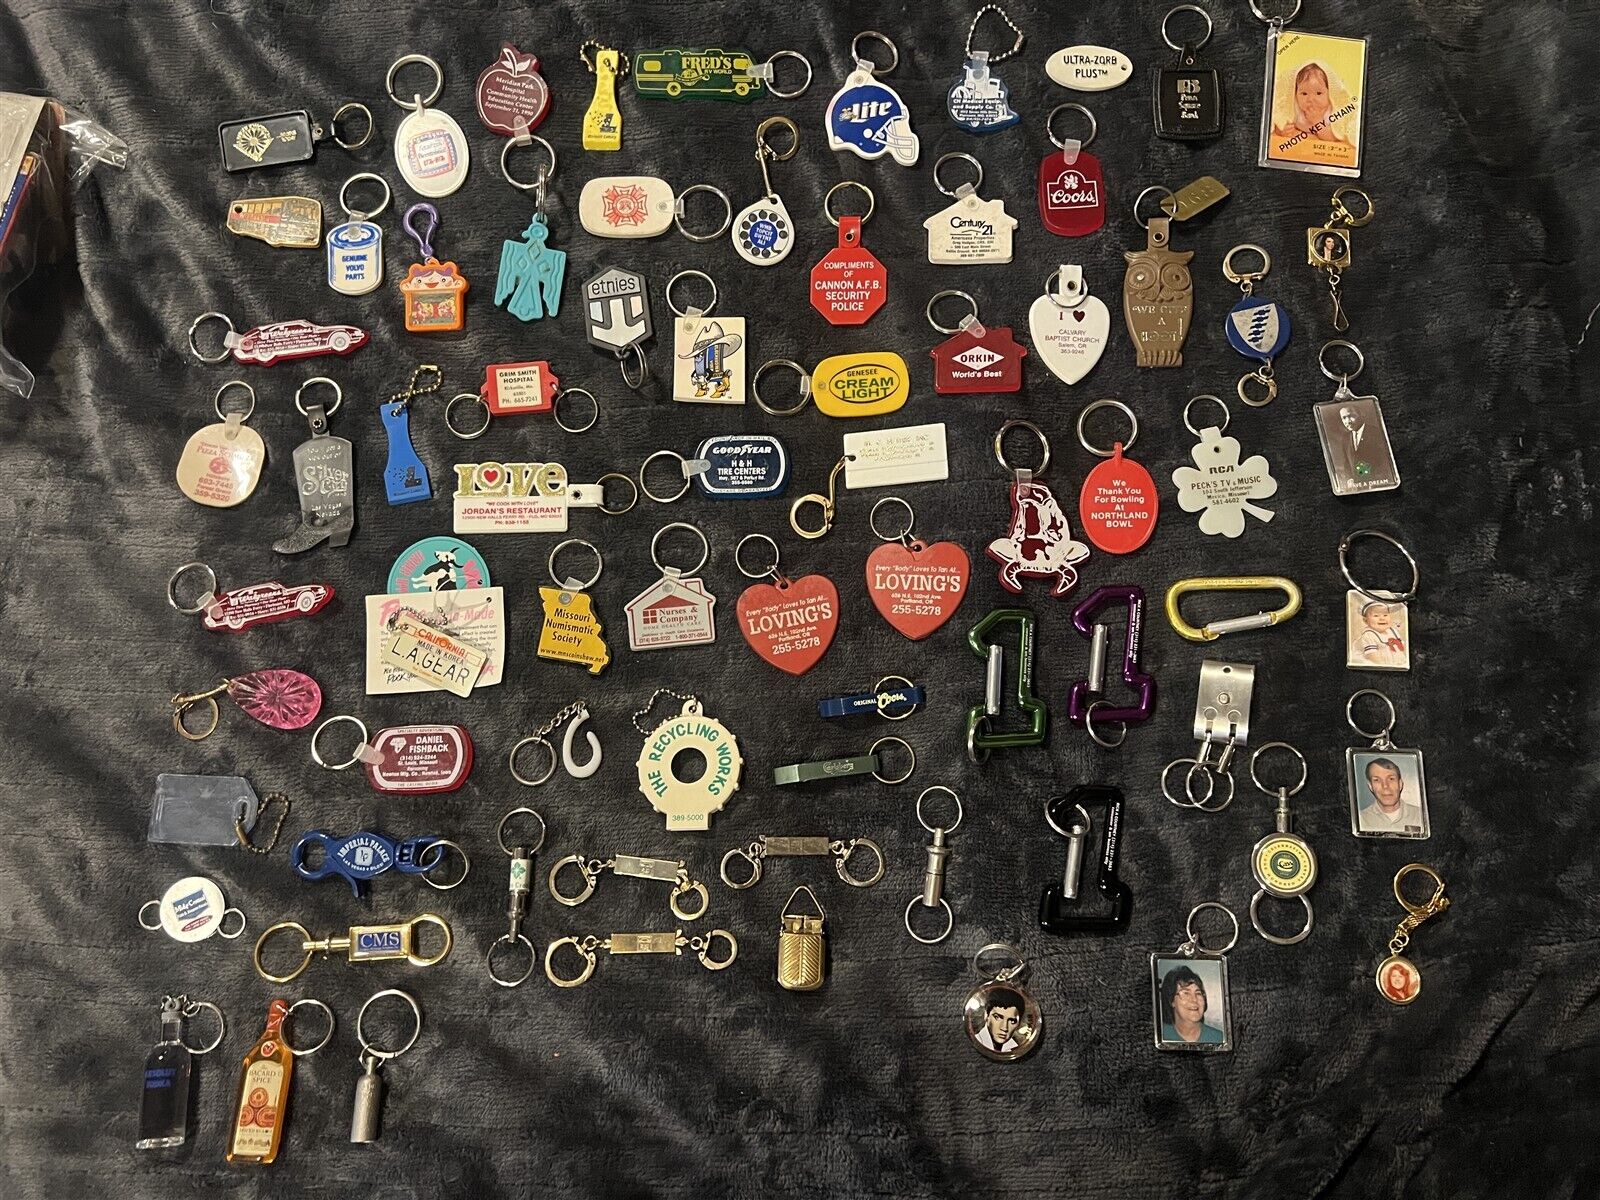 #9 VINTAGE KEYCHAIN LOT OF 75 KEY CHAINS FOBS ADTERVISING BEER BOTTLE OPENERS